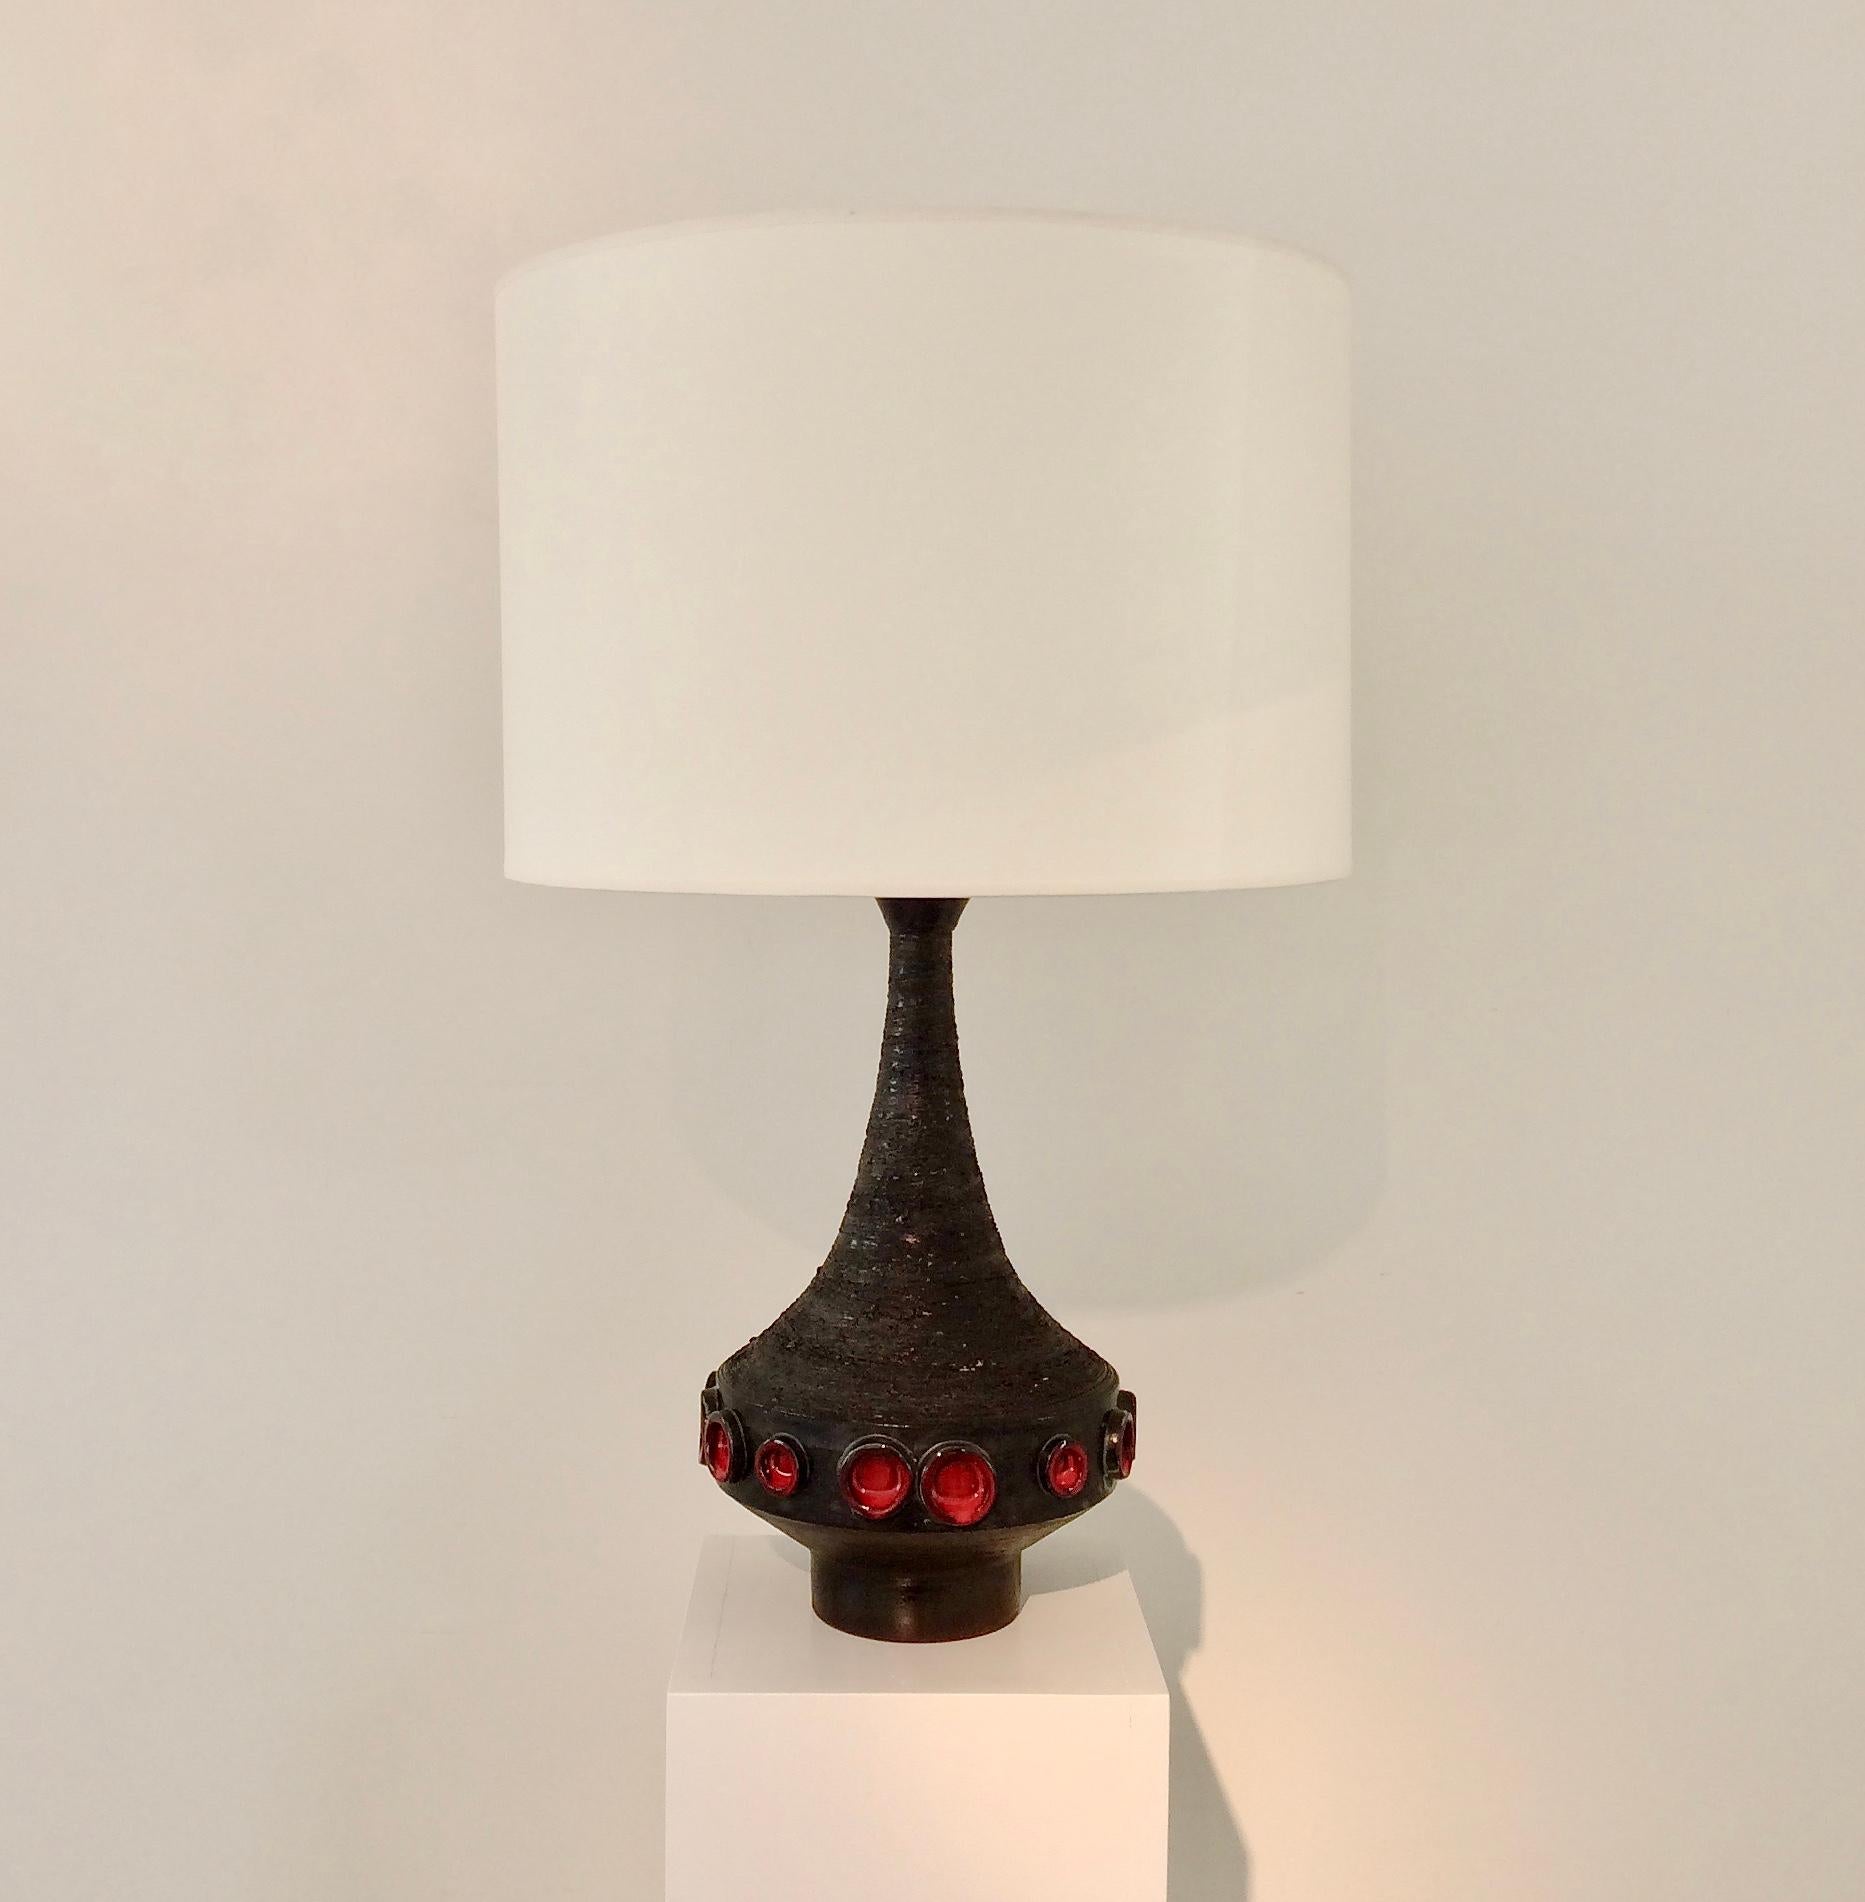 Black and red ceramic table lamp by Rogier Vandeweghe for 